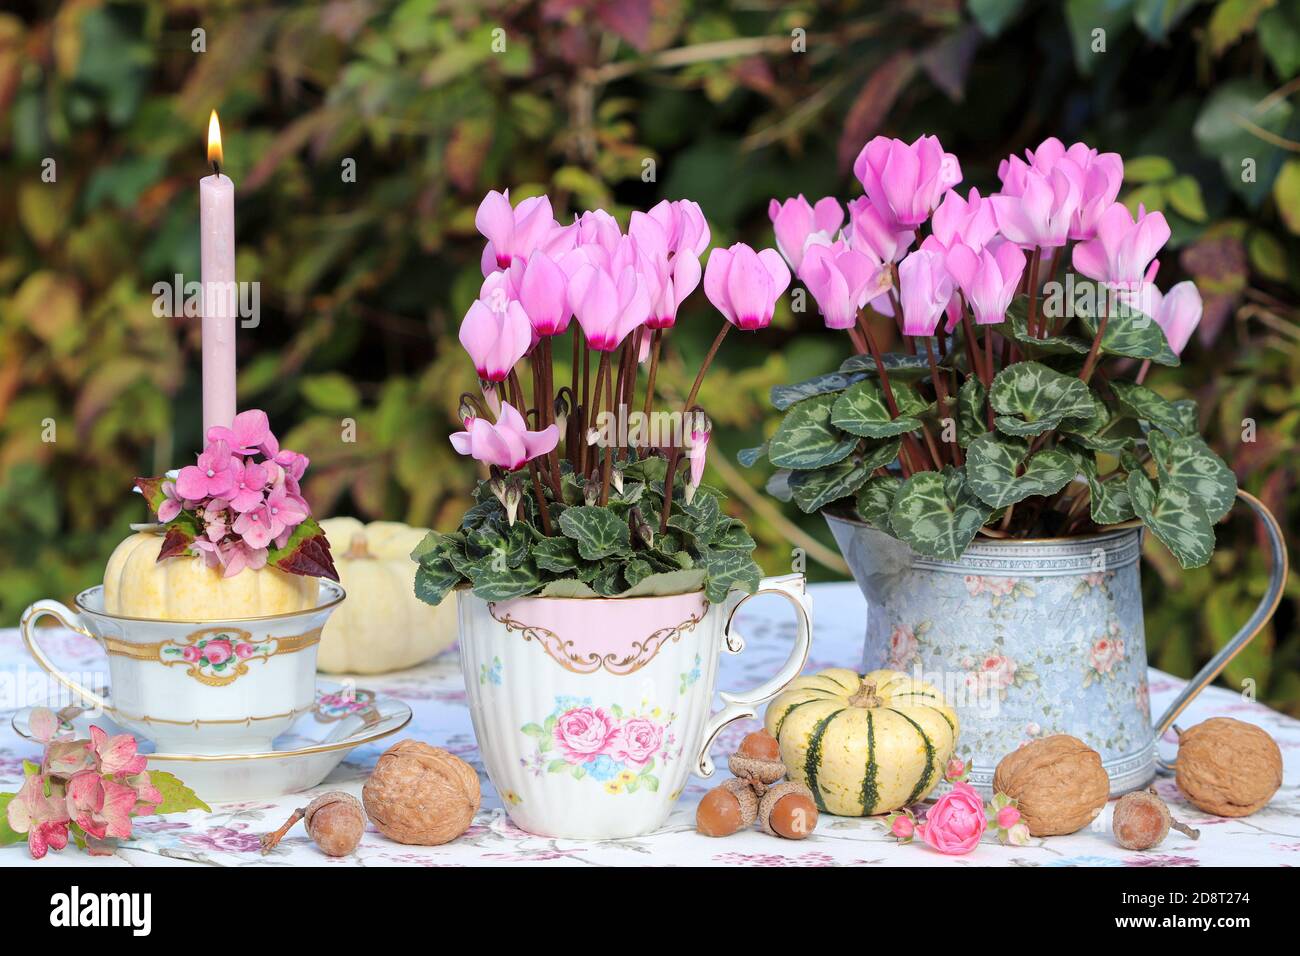 romantic autumn decoration with pink cyclamen flowers, white pumpkins and candle Stock Photo